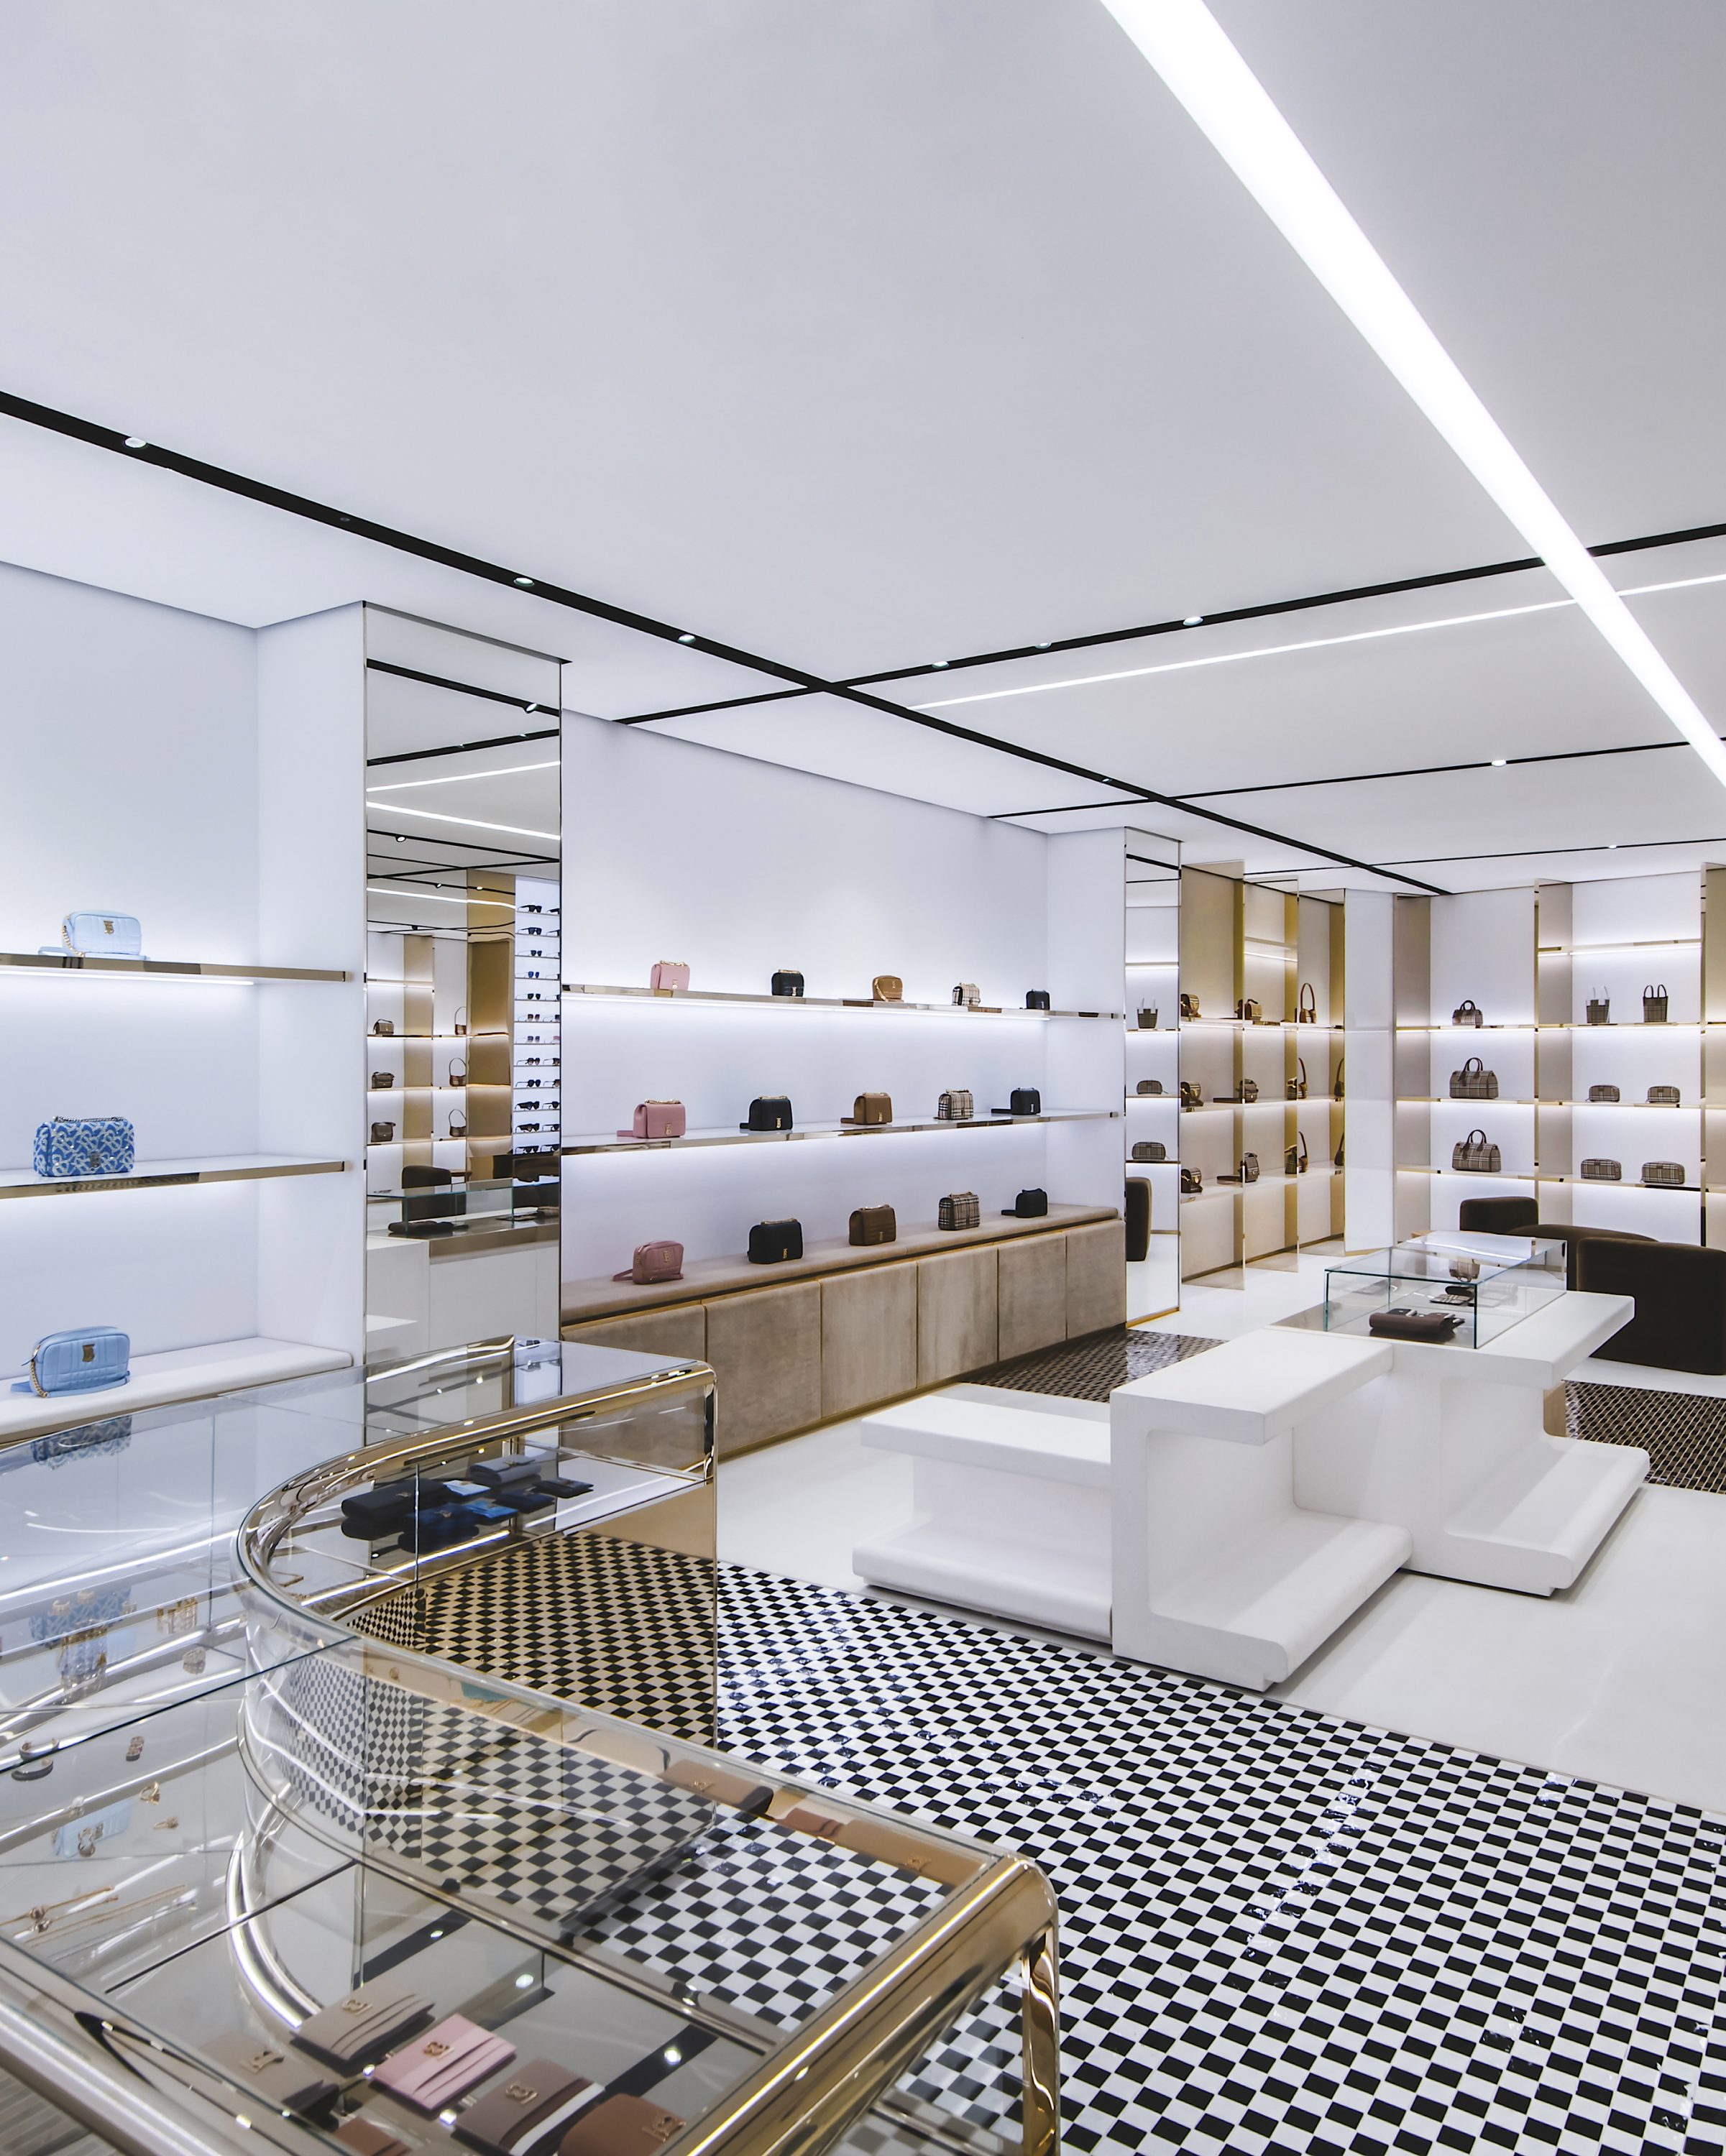 New Chanel London Flagship - New Bond Street Boutique Store